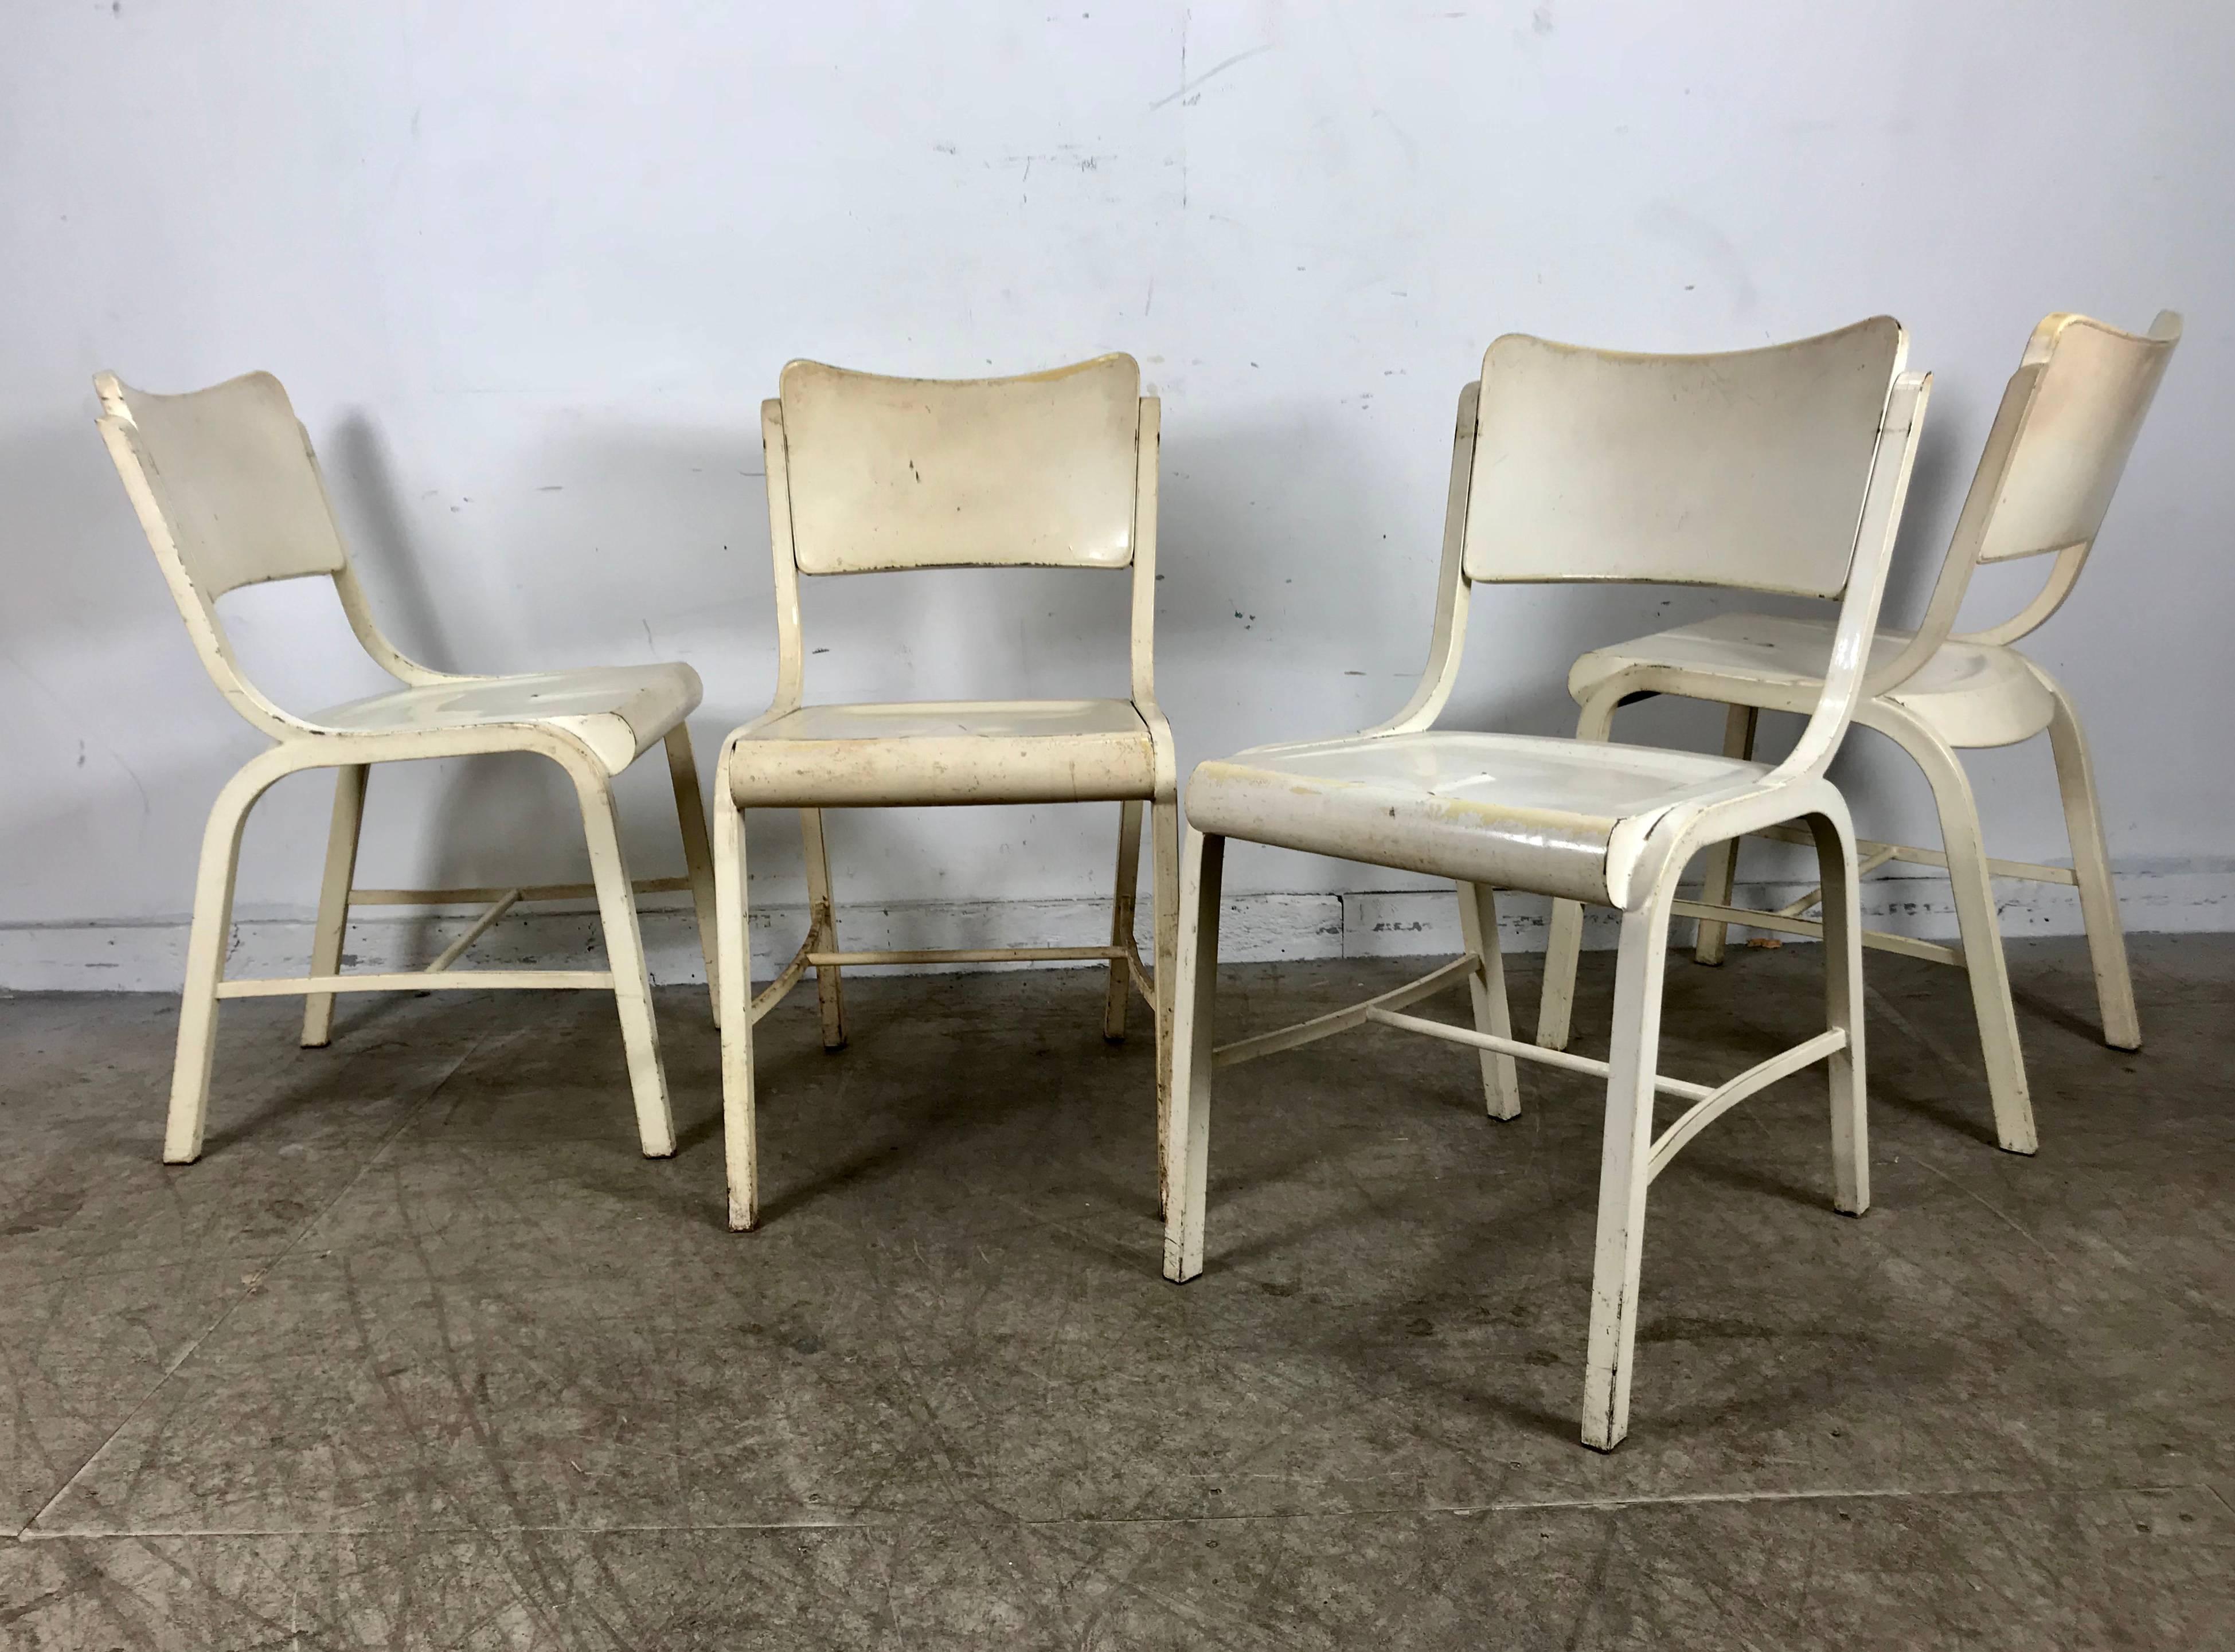 Mid-20th Century Set of Four Metal Industrial Side Chairs Manufactured by Doehler Metal Furn Co